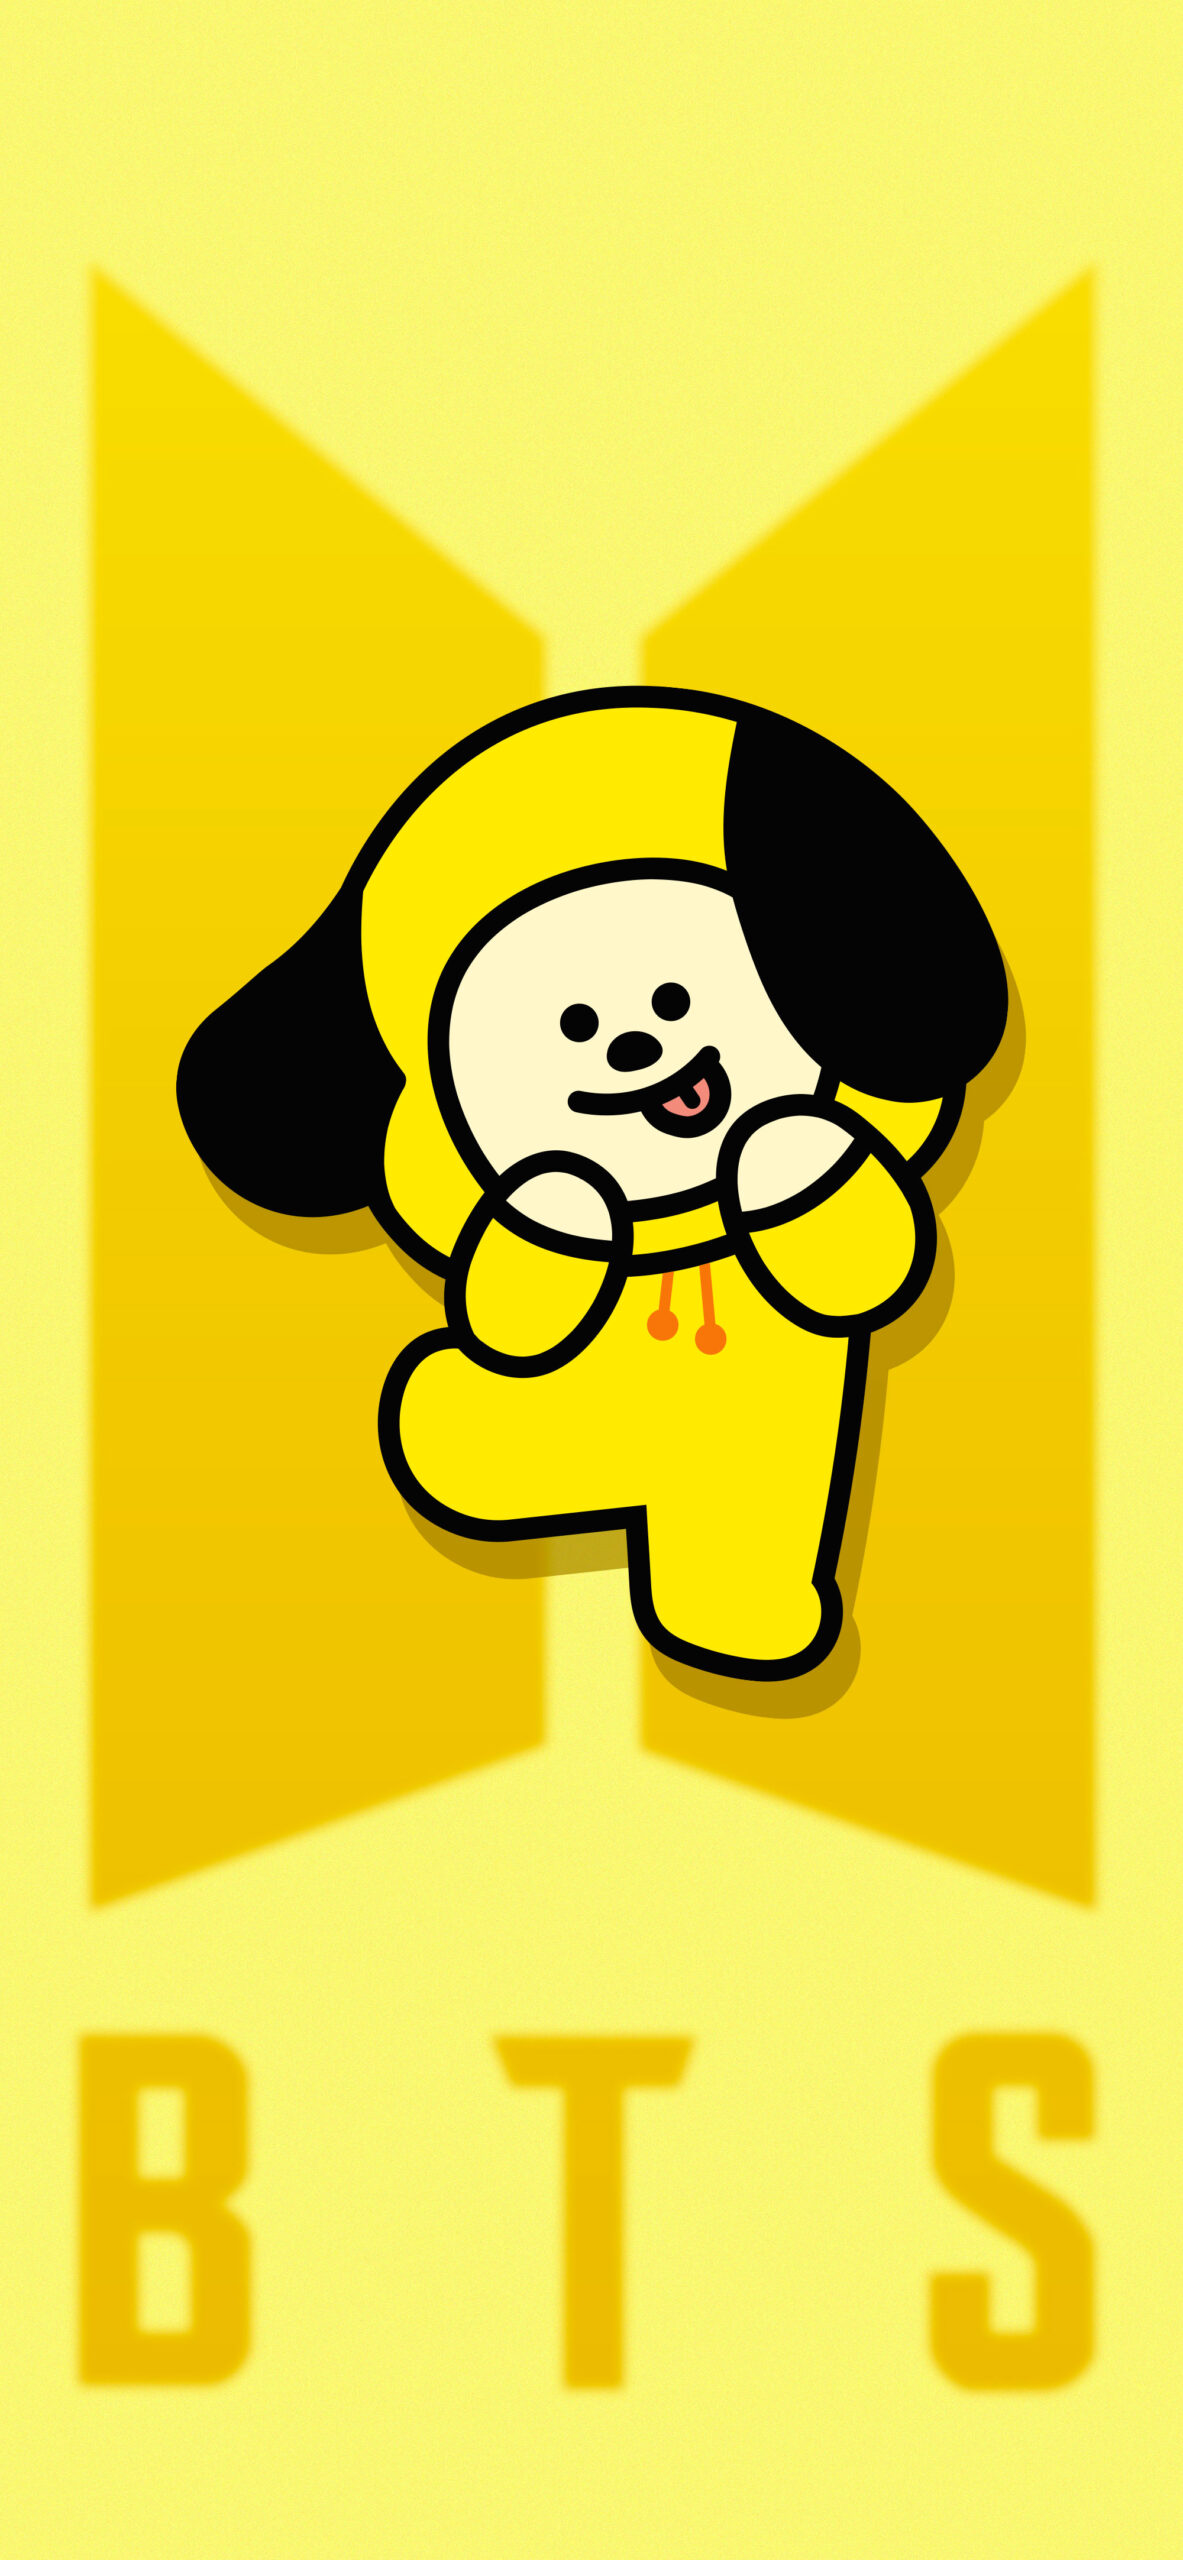 Chimmy BT21 Wallpaper for Phone - BTS Wallpapers - Wallpapers Clan